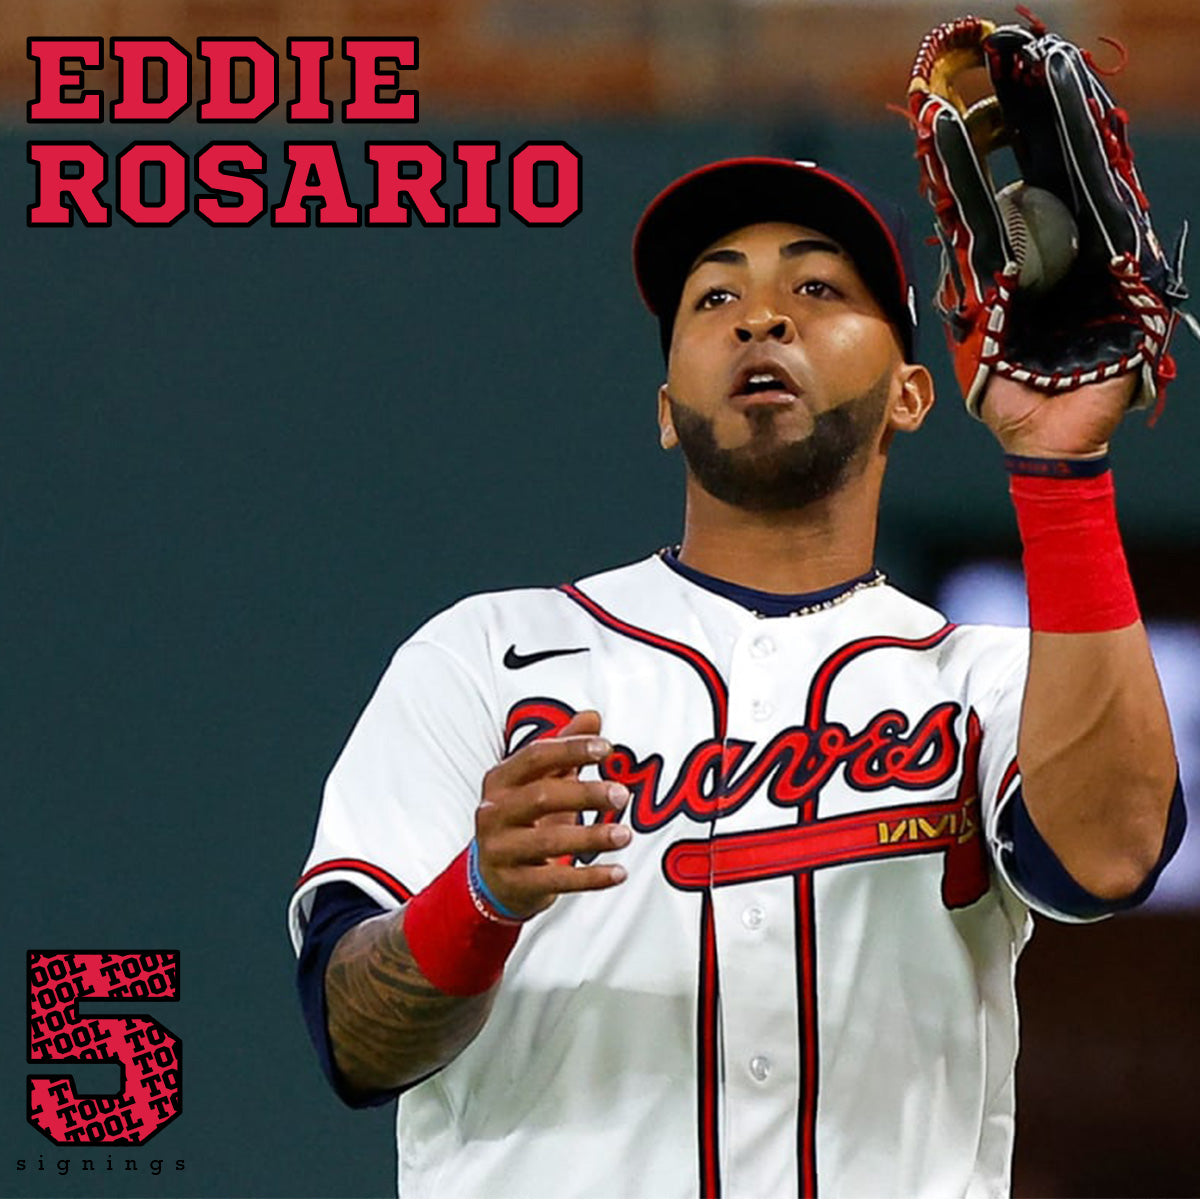 Eddie Rosario MLB Authenticated, Game Worn, and Autographed City